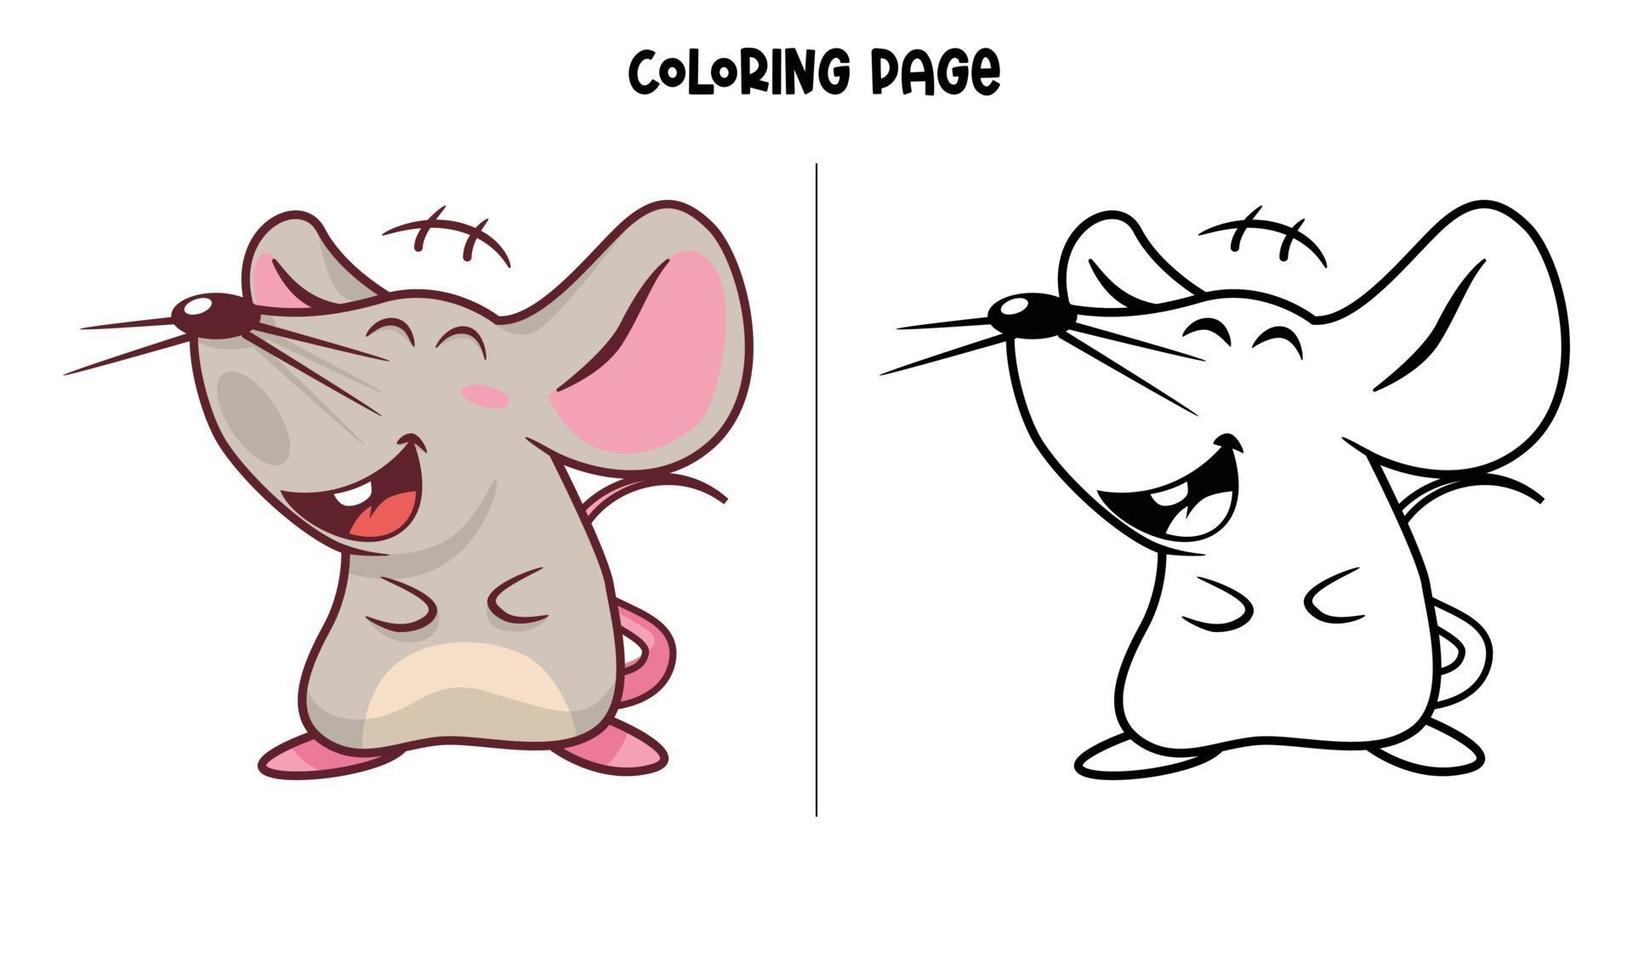 Laughing Mouse Coloring Page vector